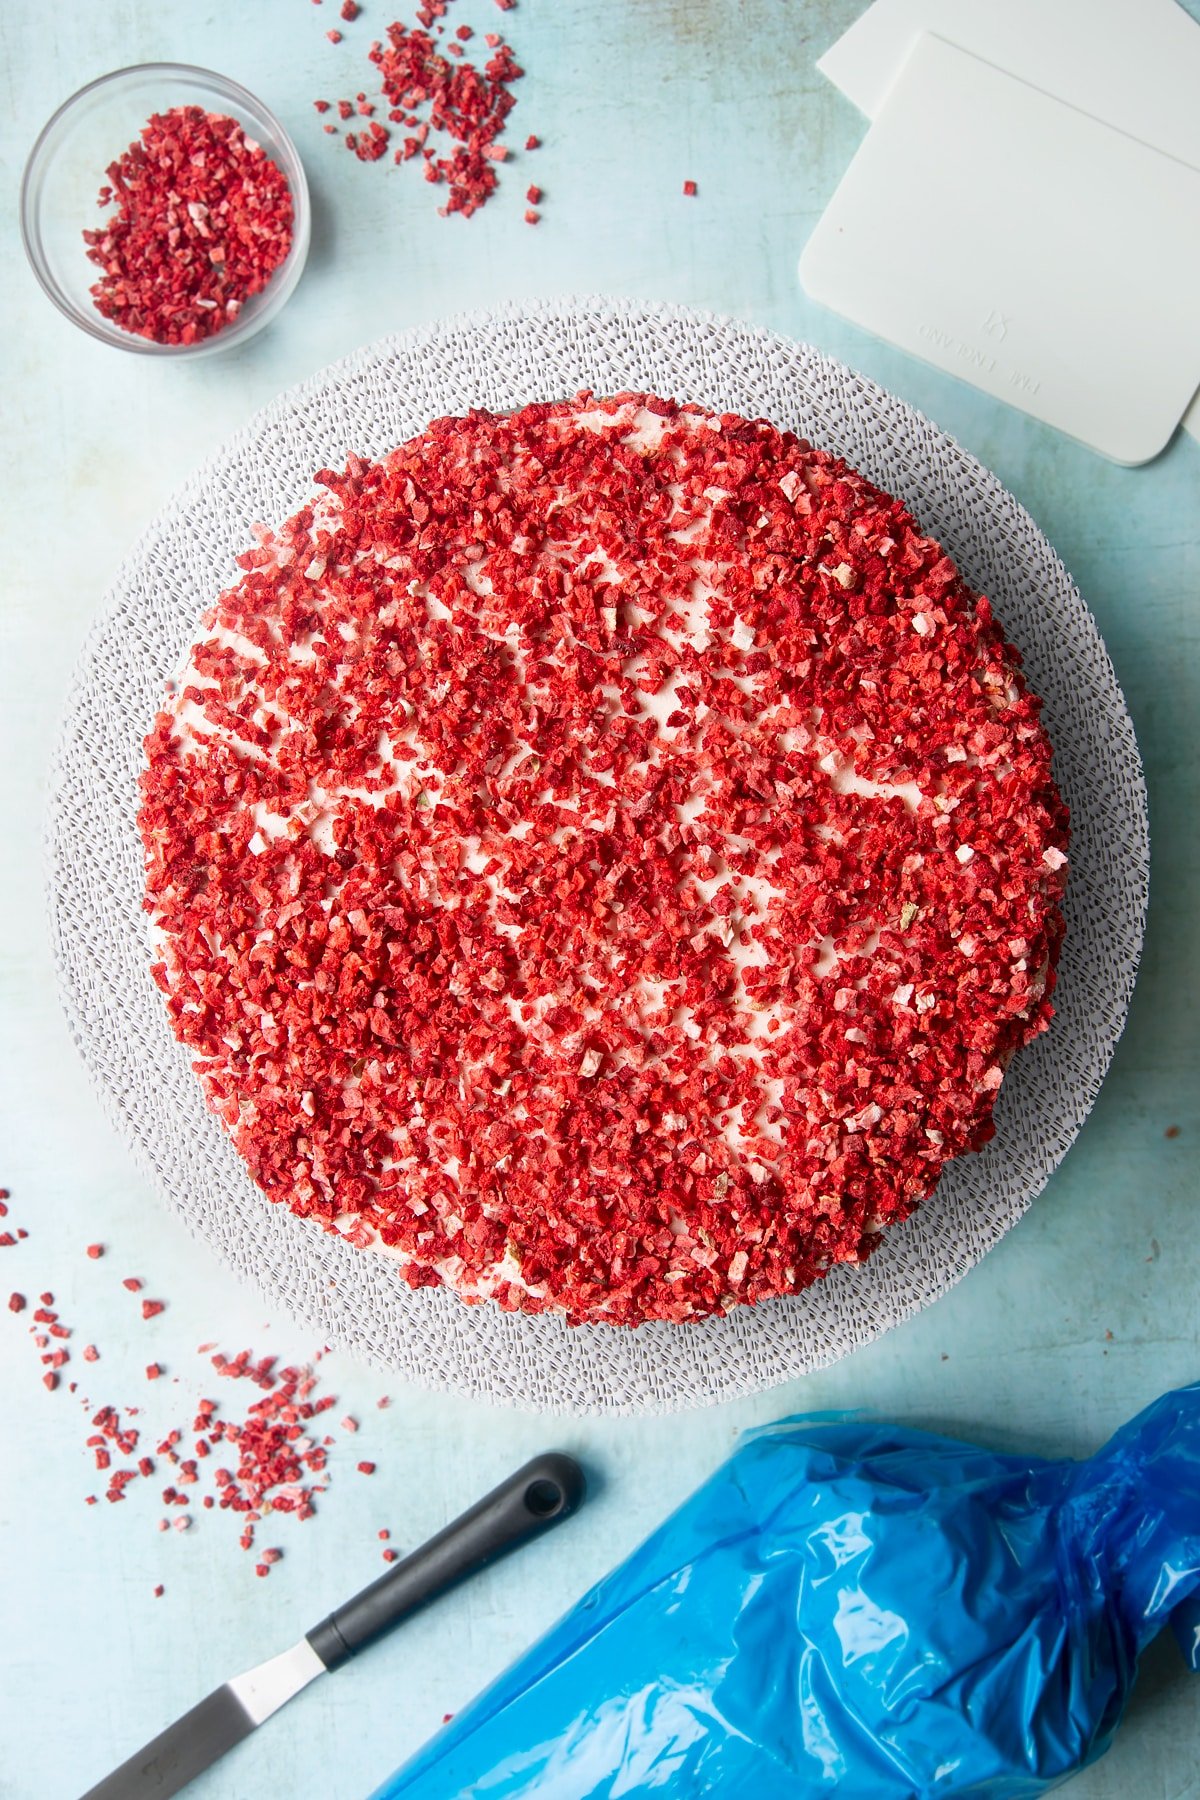 The three layers of a pink ombre cake from brightest to palest pink, stacked on a cake turntable. Pale pink frosting is sandwiched between the layers and coats the outside of the cake, which is then scattered with dried strawberry pieces.